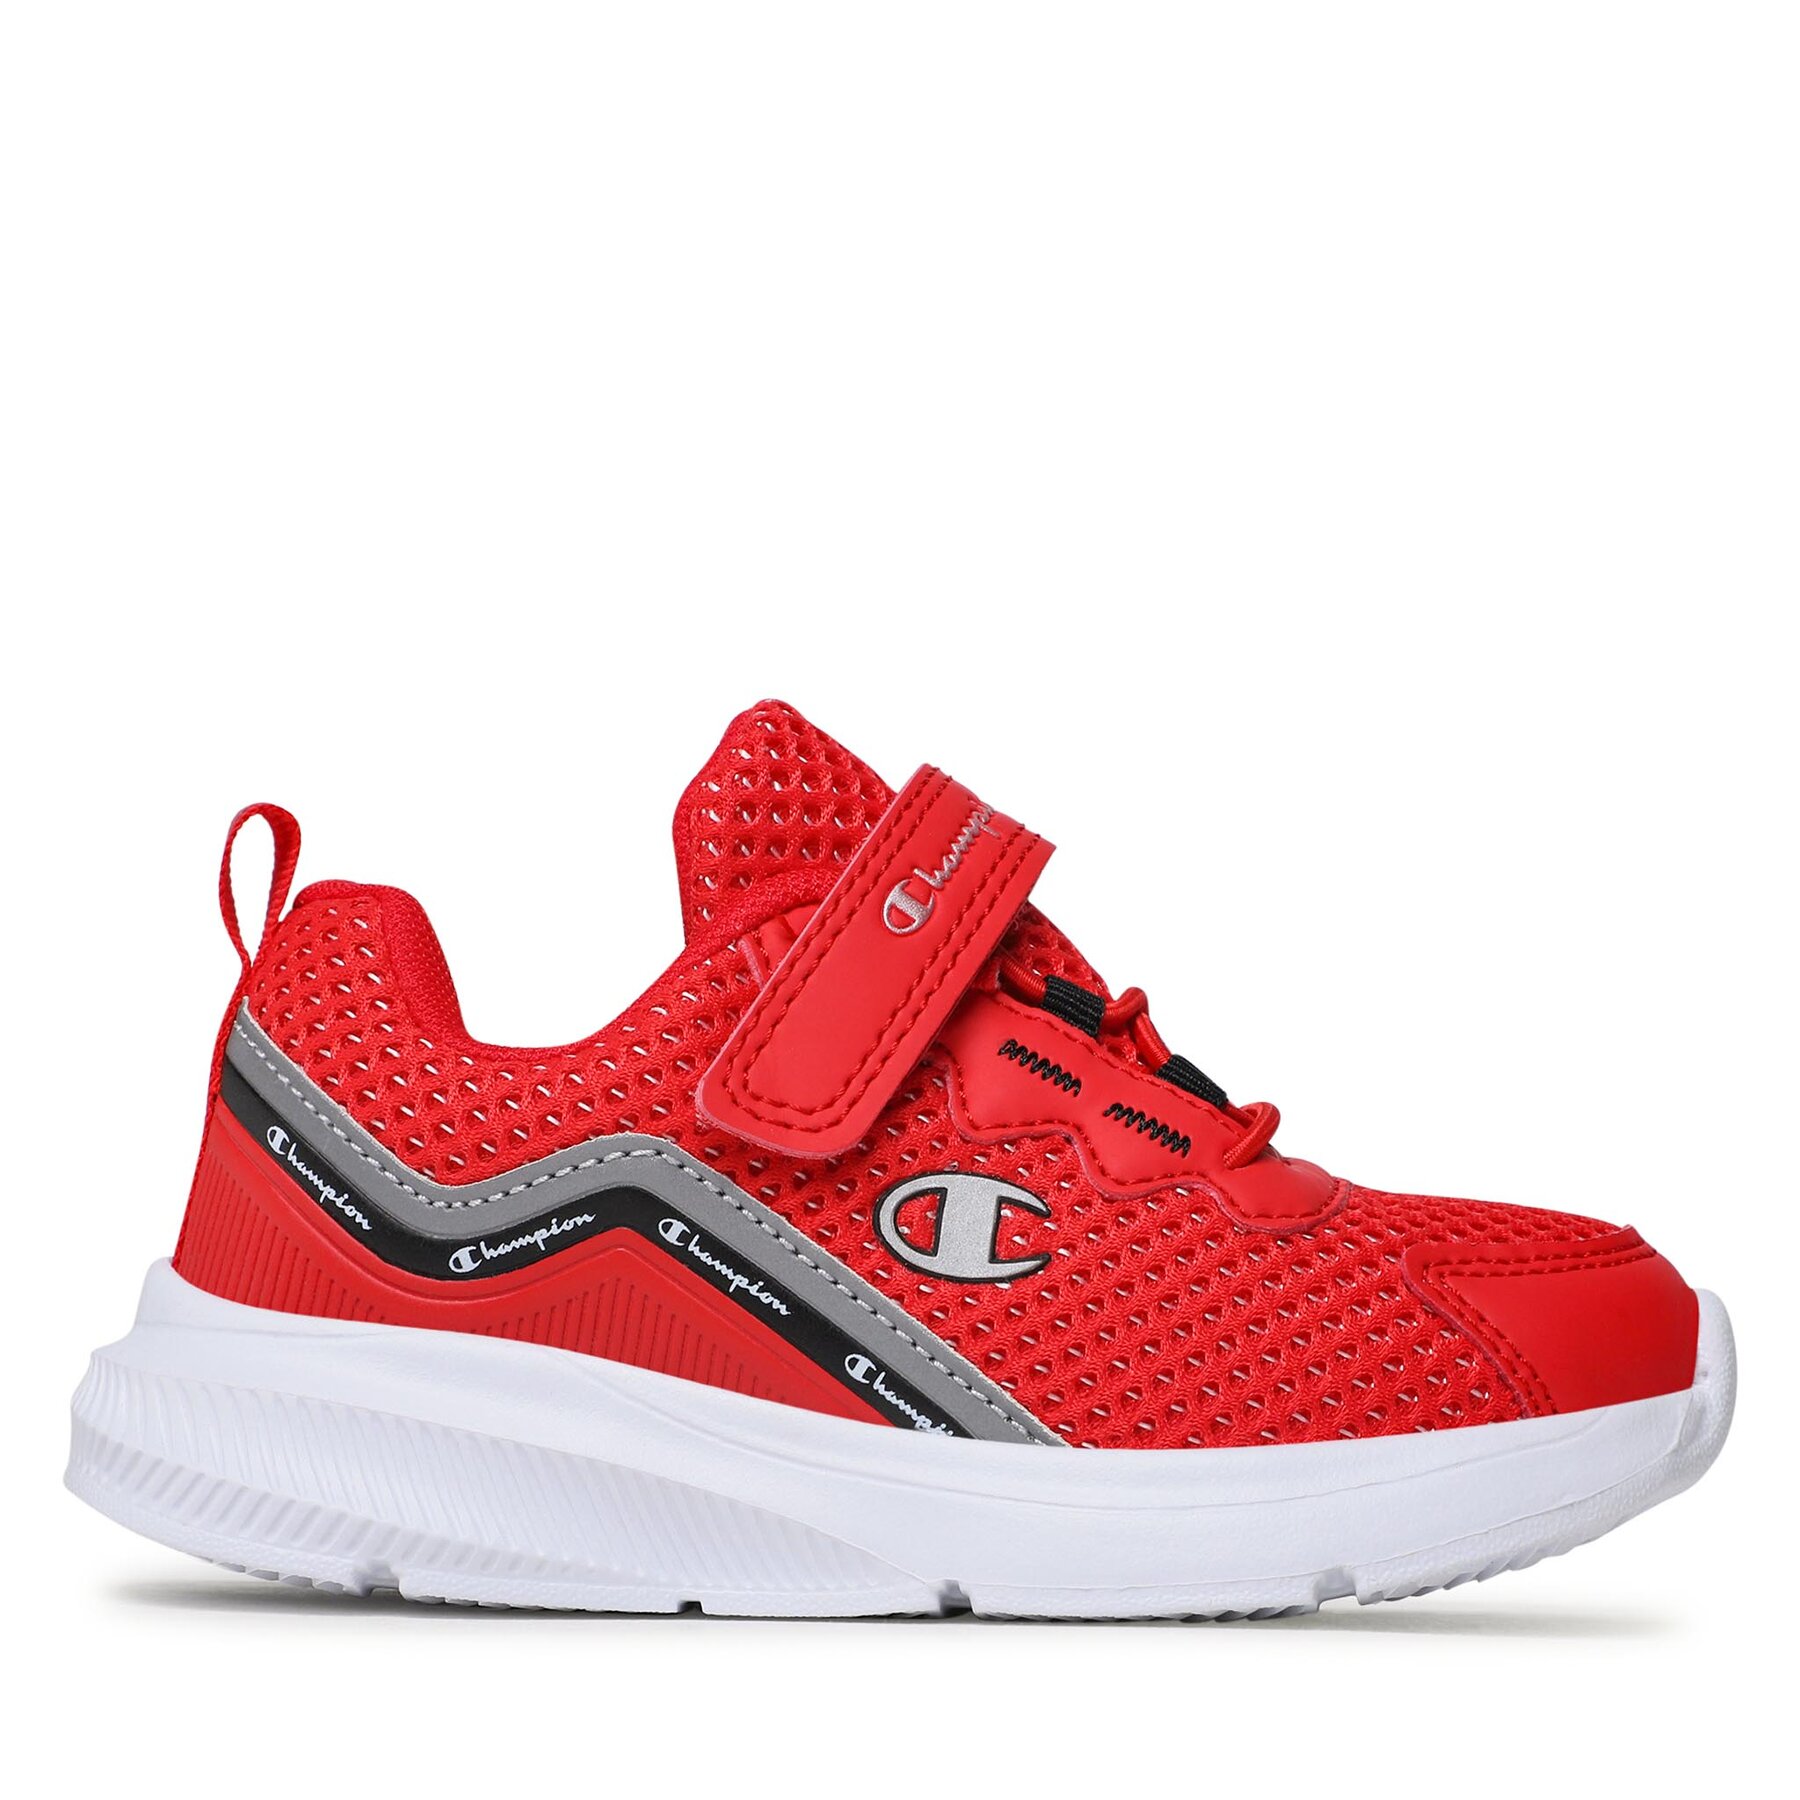 Sneakers Champion Shout Out B Td S32667-CHA-RS001 Red/Wht/Nbk von Champion